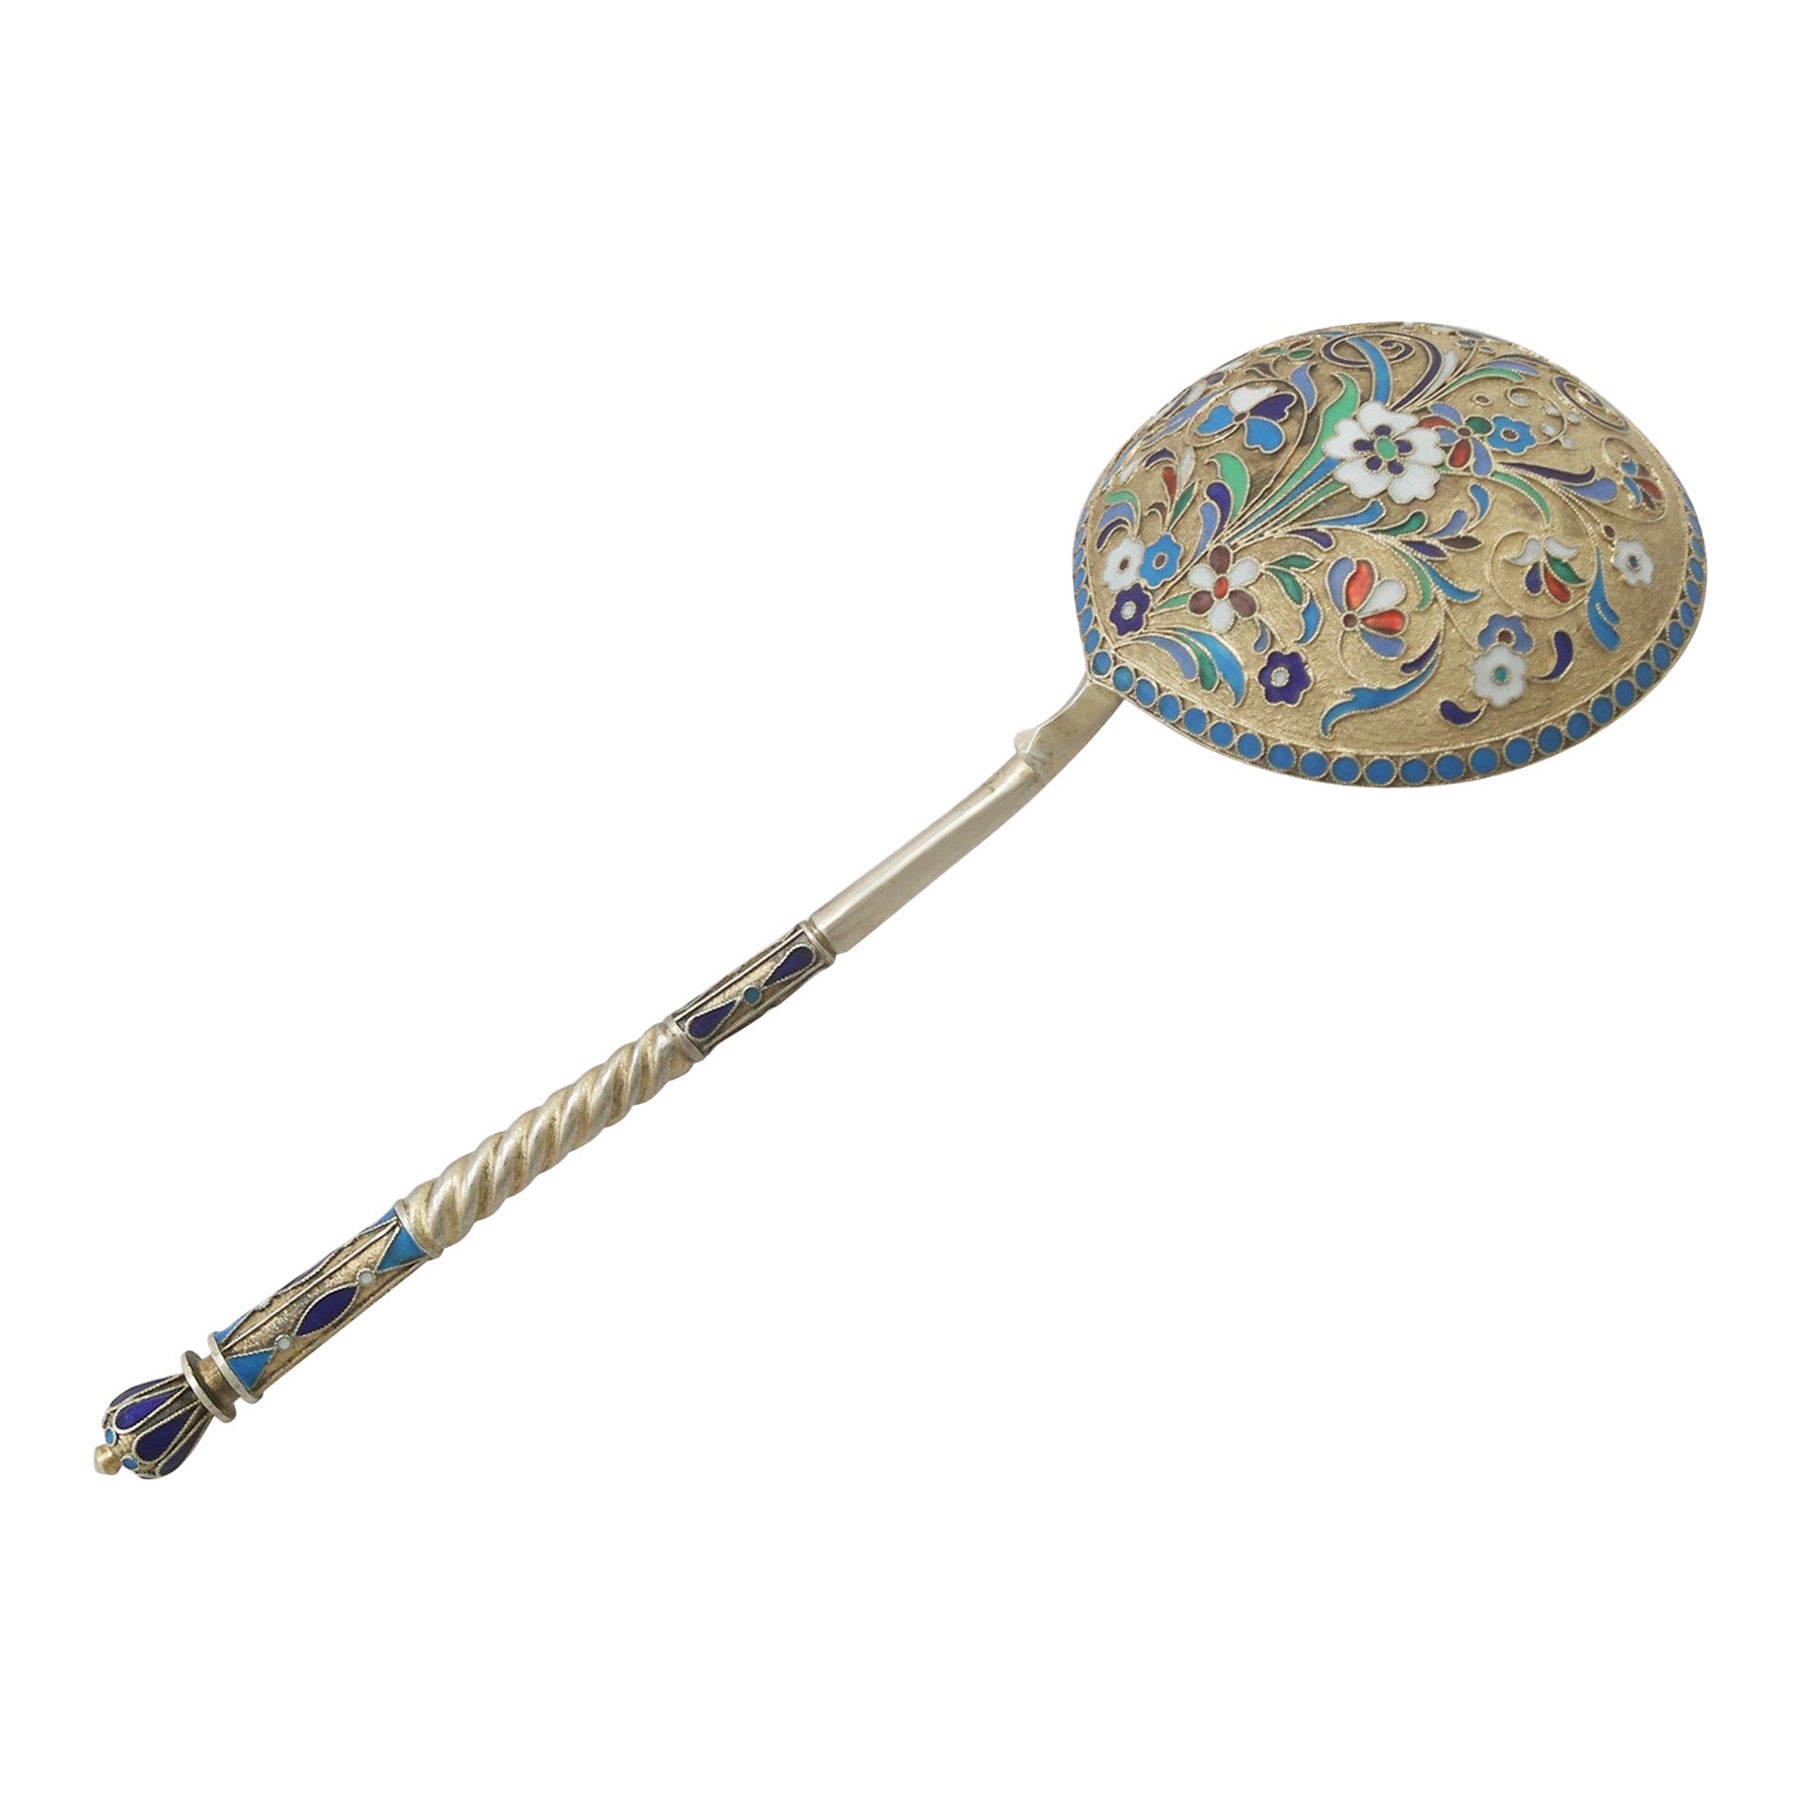 An exceptional, Fine and impressive large antique Russian silver gilt and polychrome cloisonné enamel spoon; an addition to our Russian silverware collection.

This exceptional antique Russian silver spoon has a large circular bowl onto a shaped